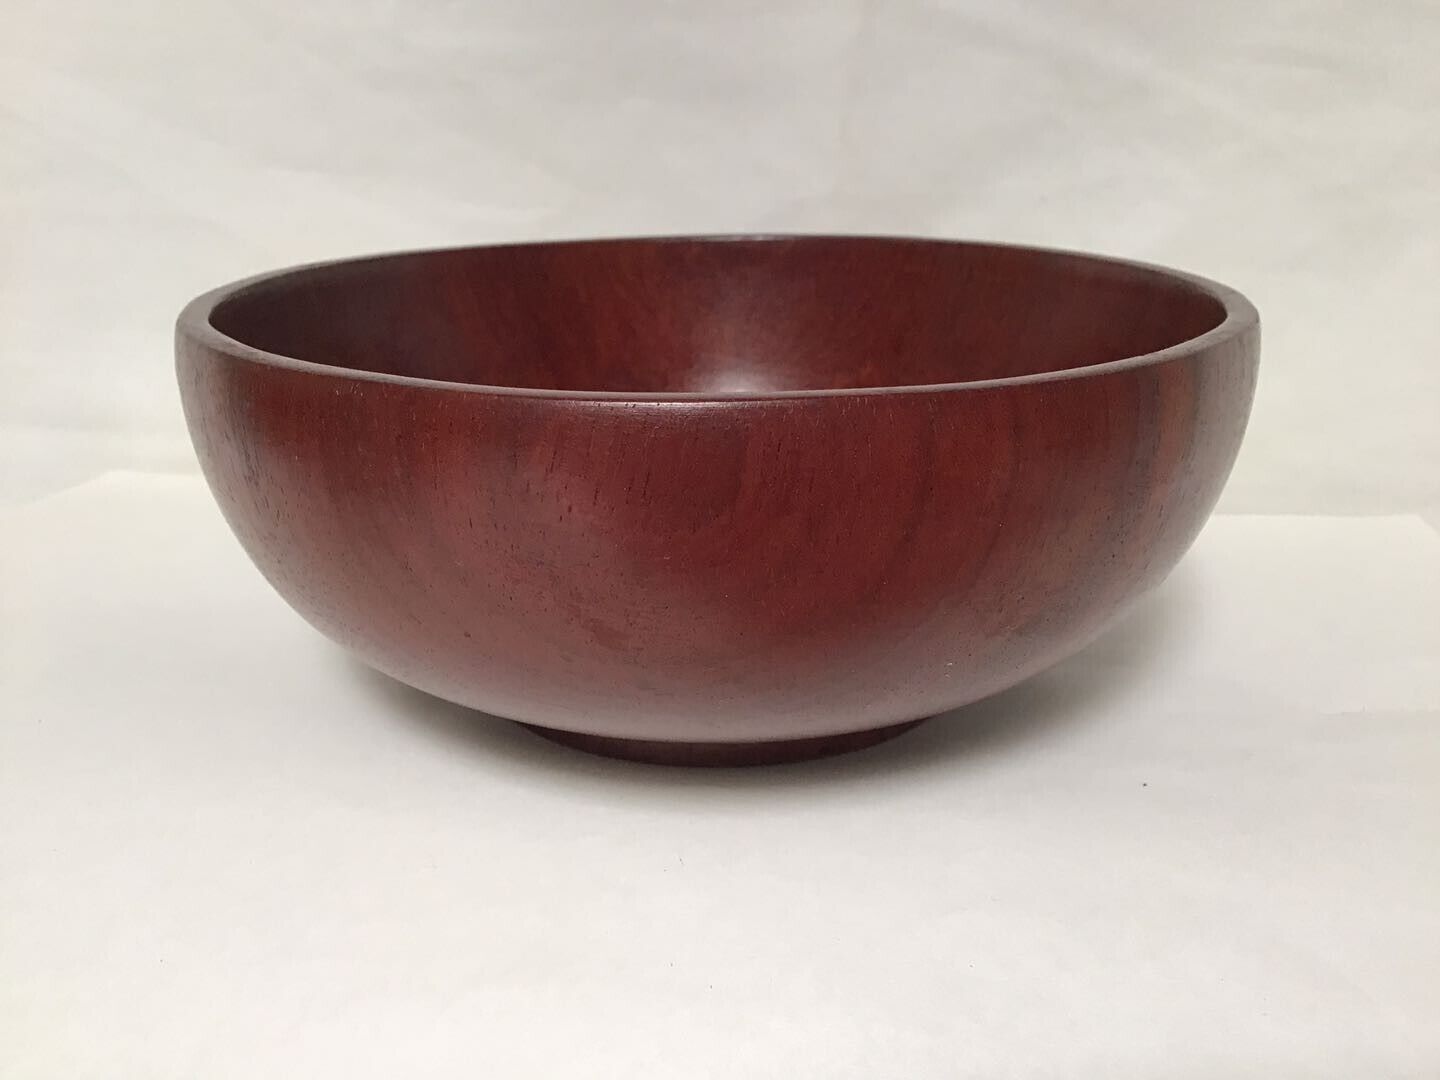 RR29 Vintage Very Beautiful Wooden Bowl Made of High-Quality Hardwood For Gift